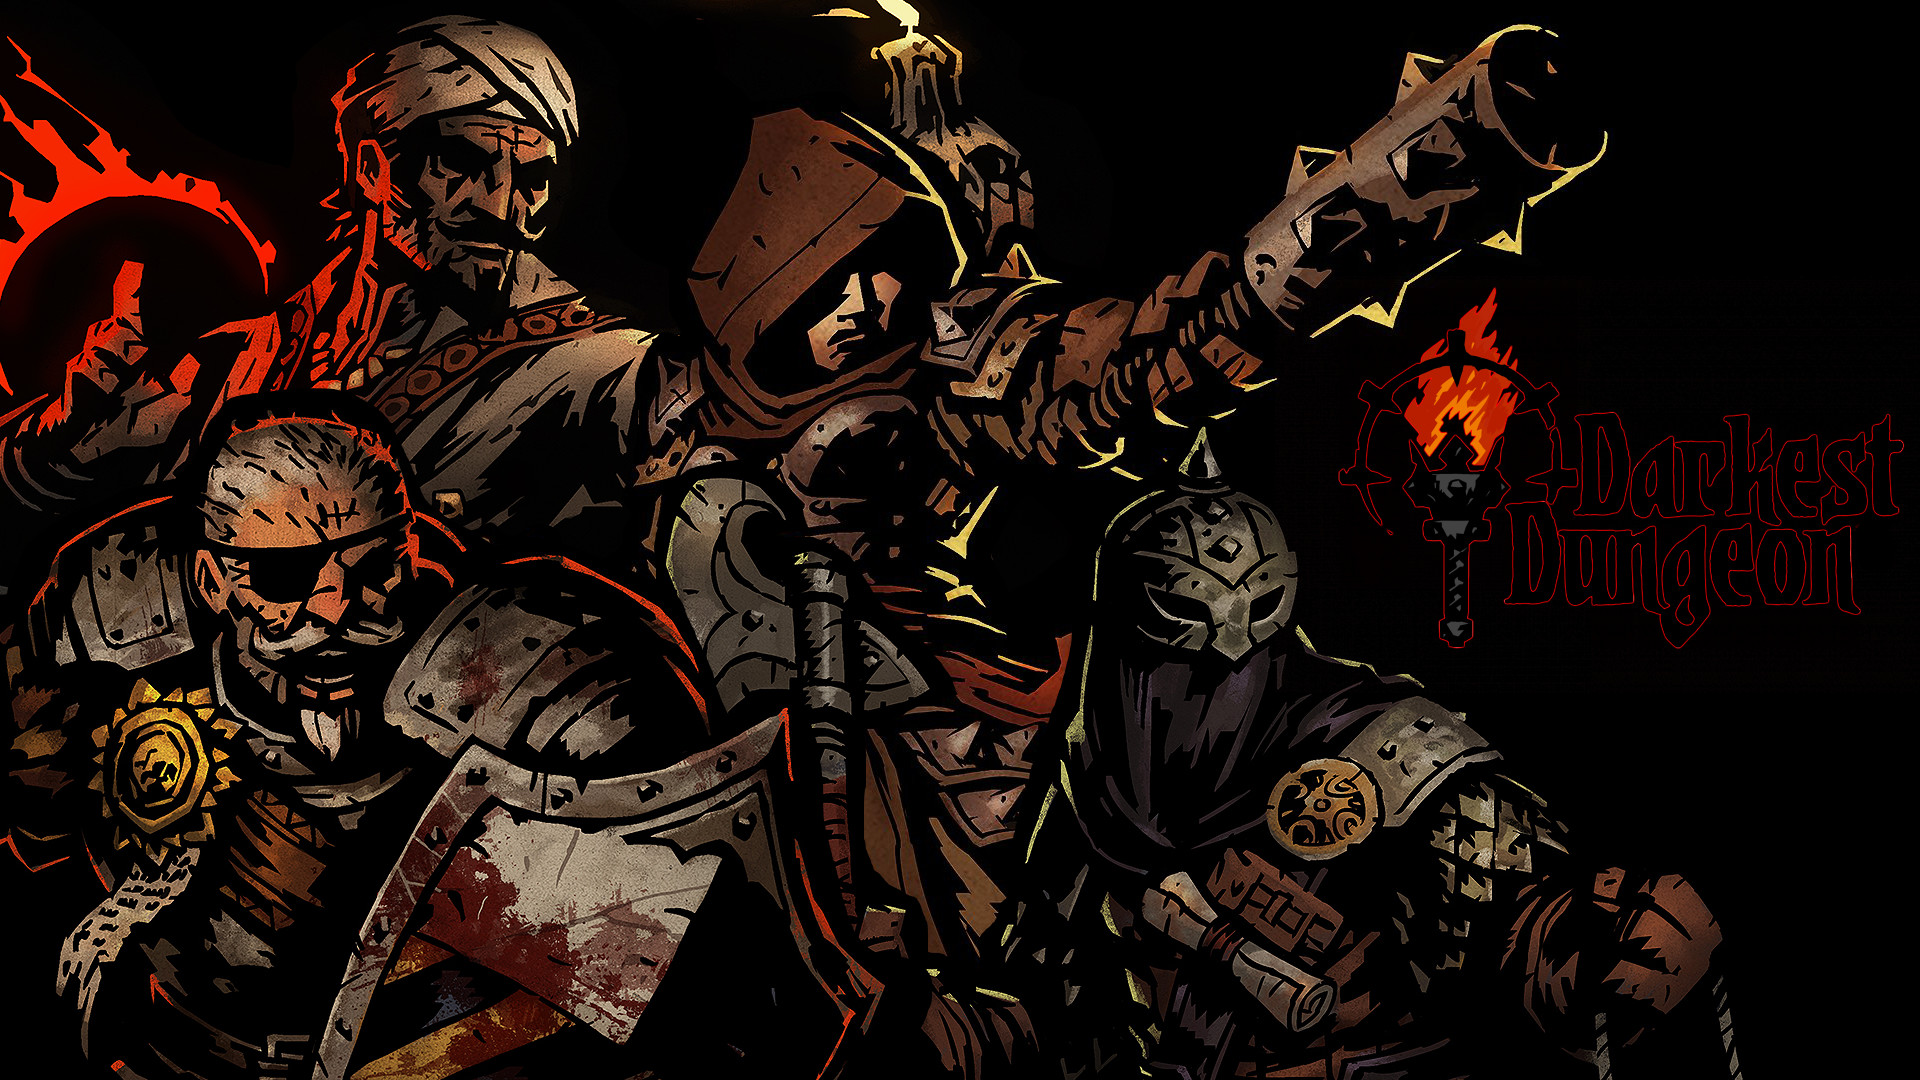 1920x1080 Just a custom made Darkest Dungeon wallpaper done is Photoshop.. have fun~